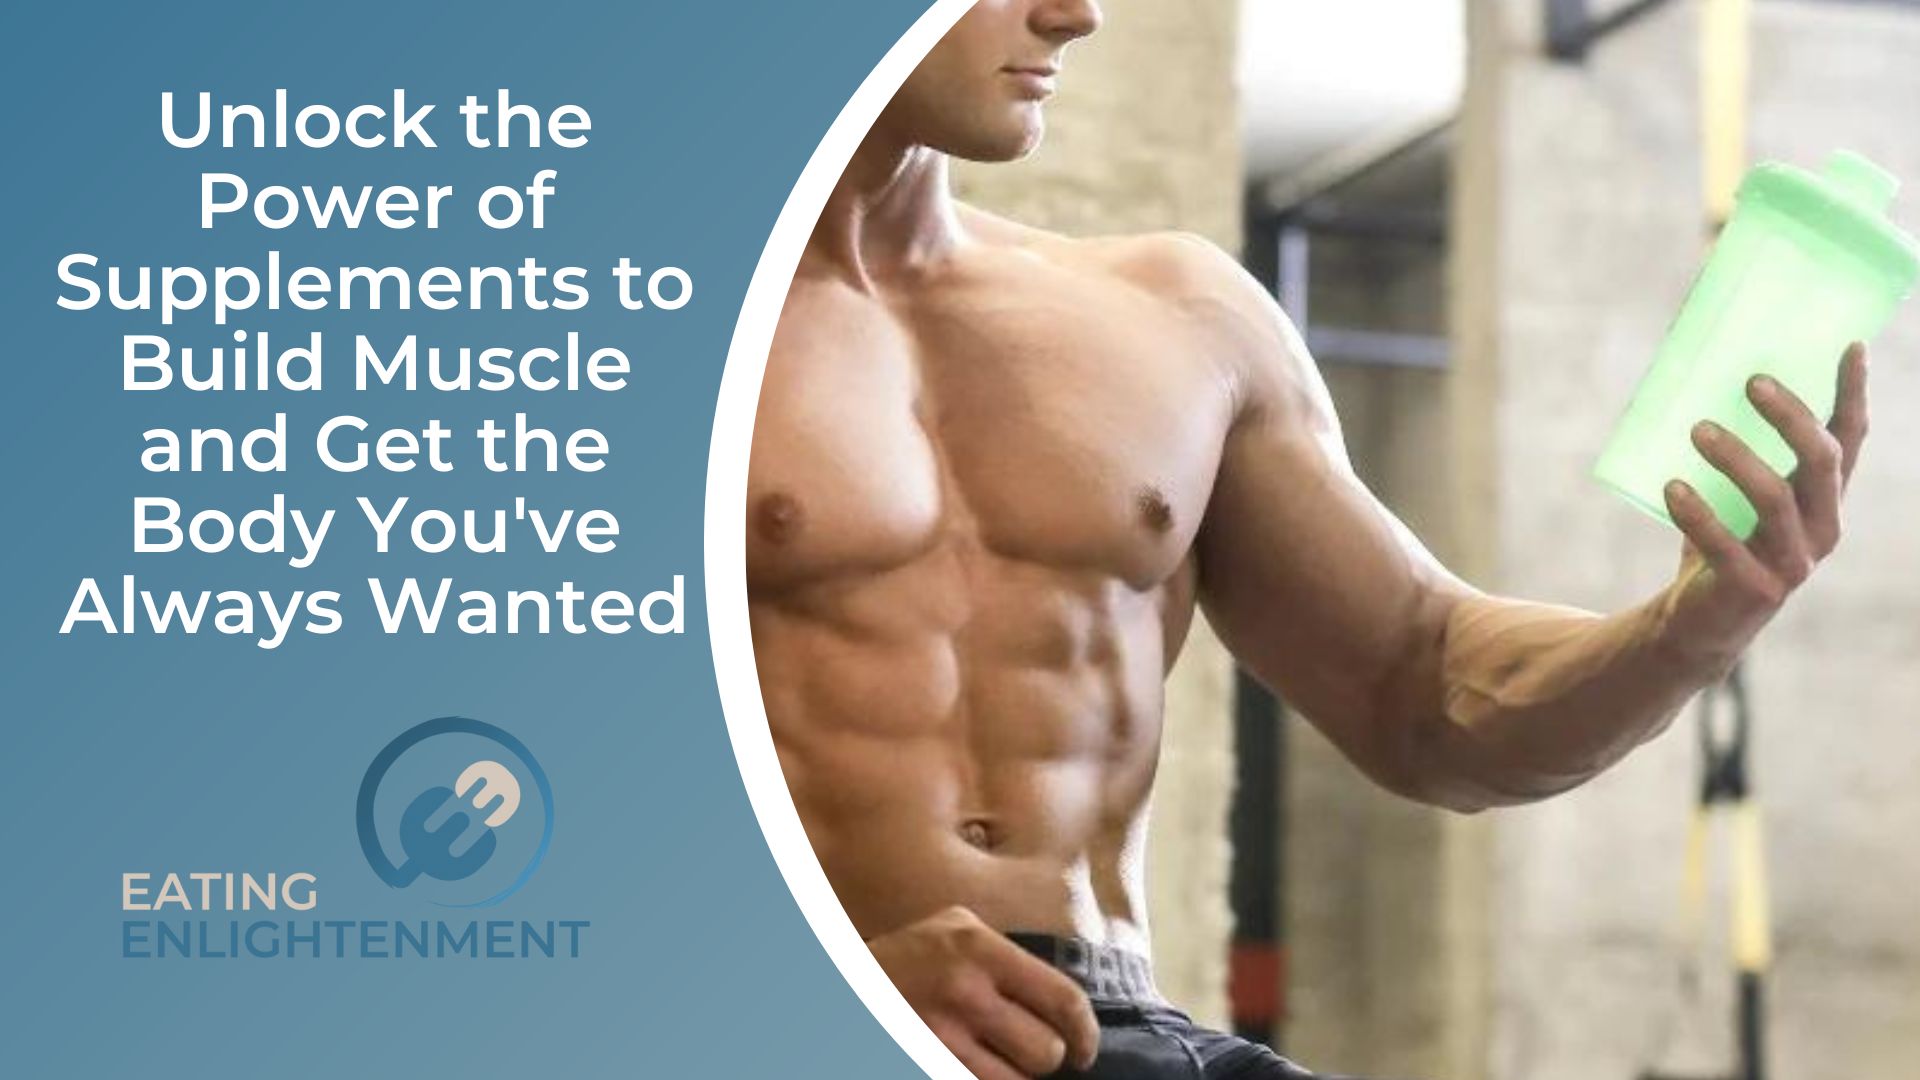 Unlock the Power of Supplements to Build Muscle and Get the Body You've Always Wanted